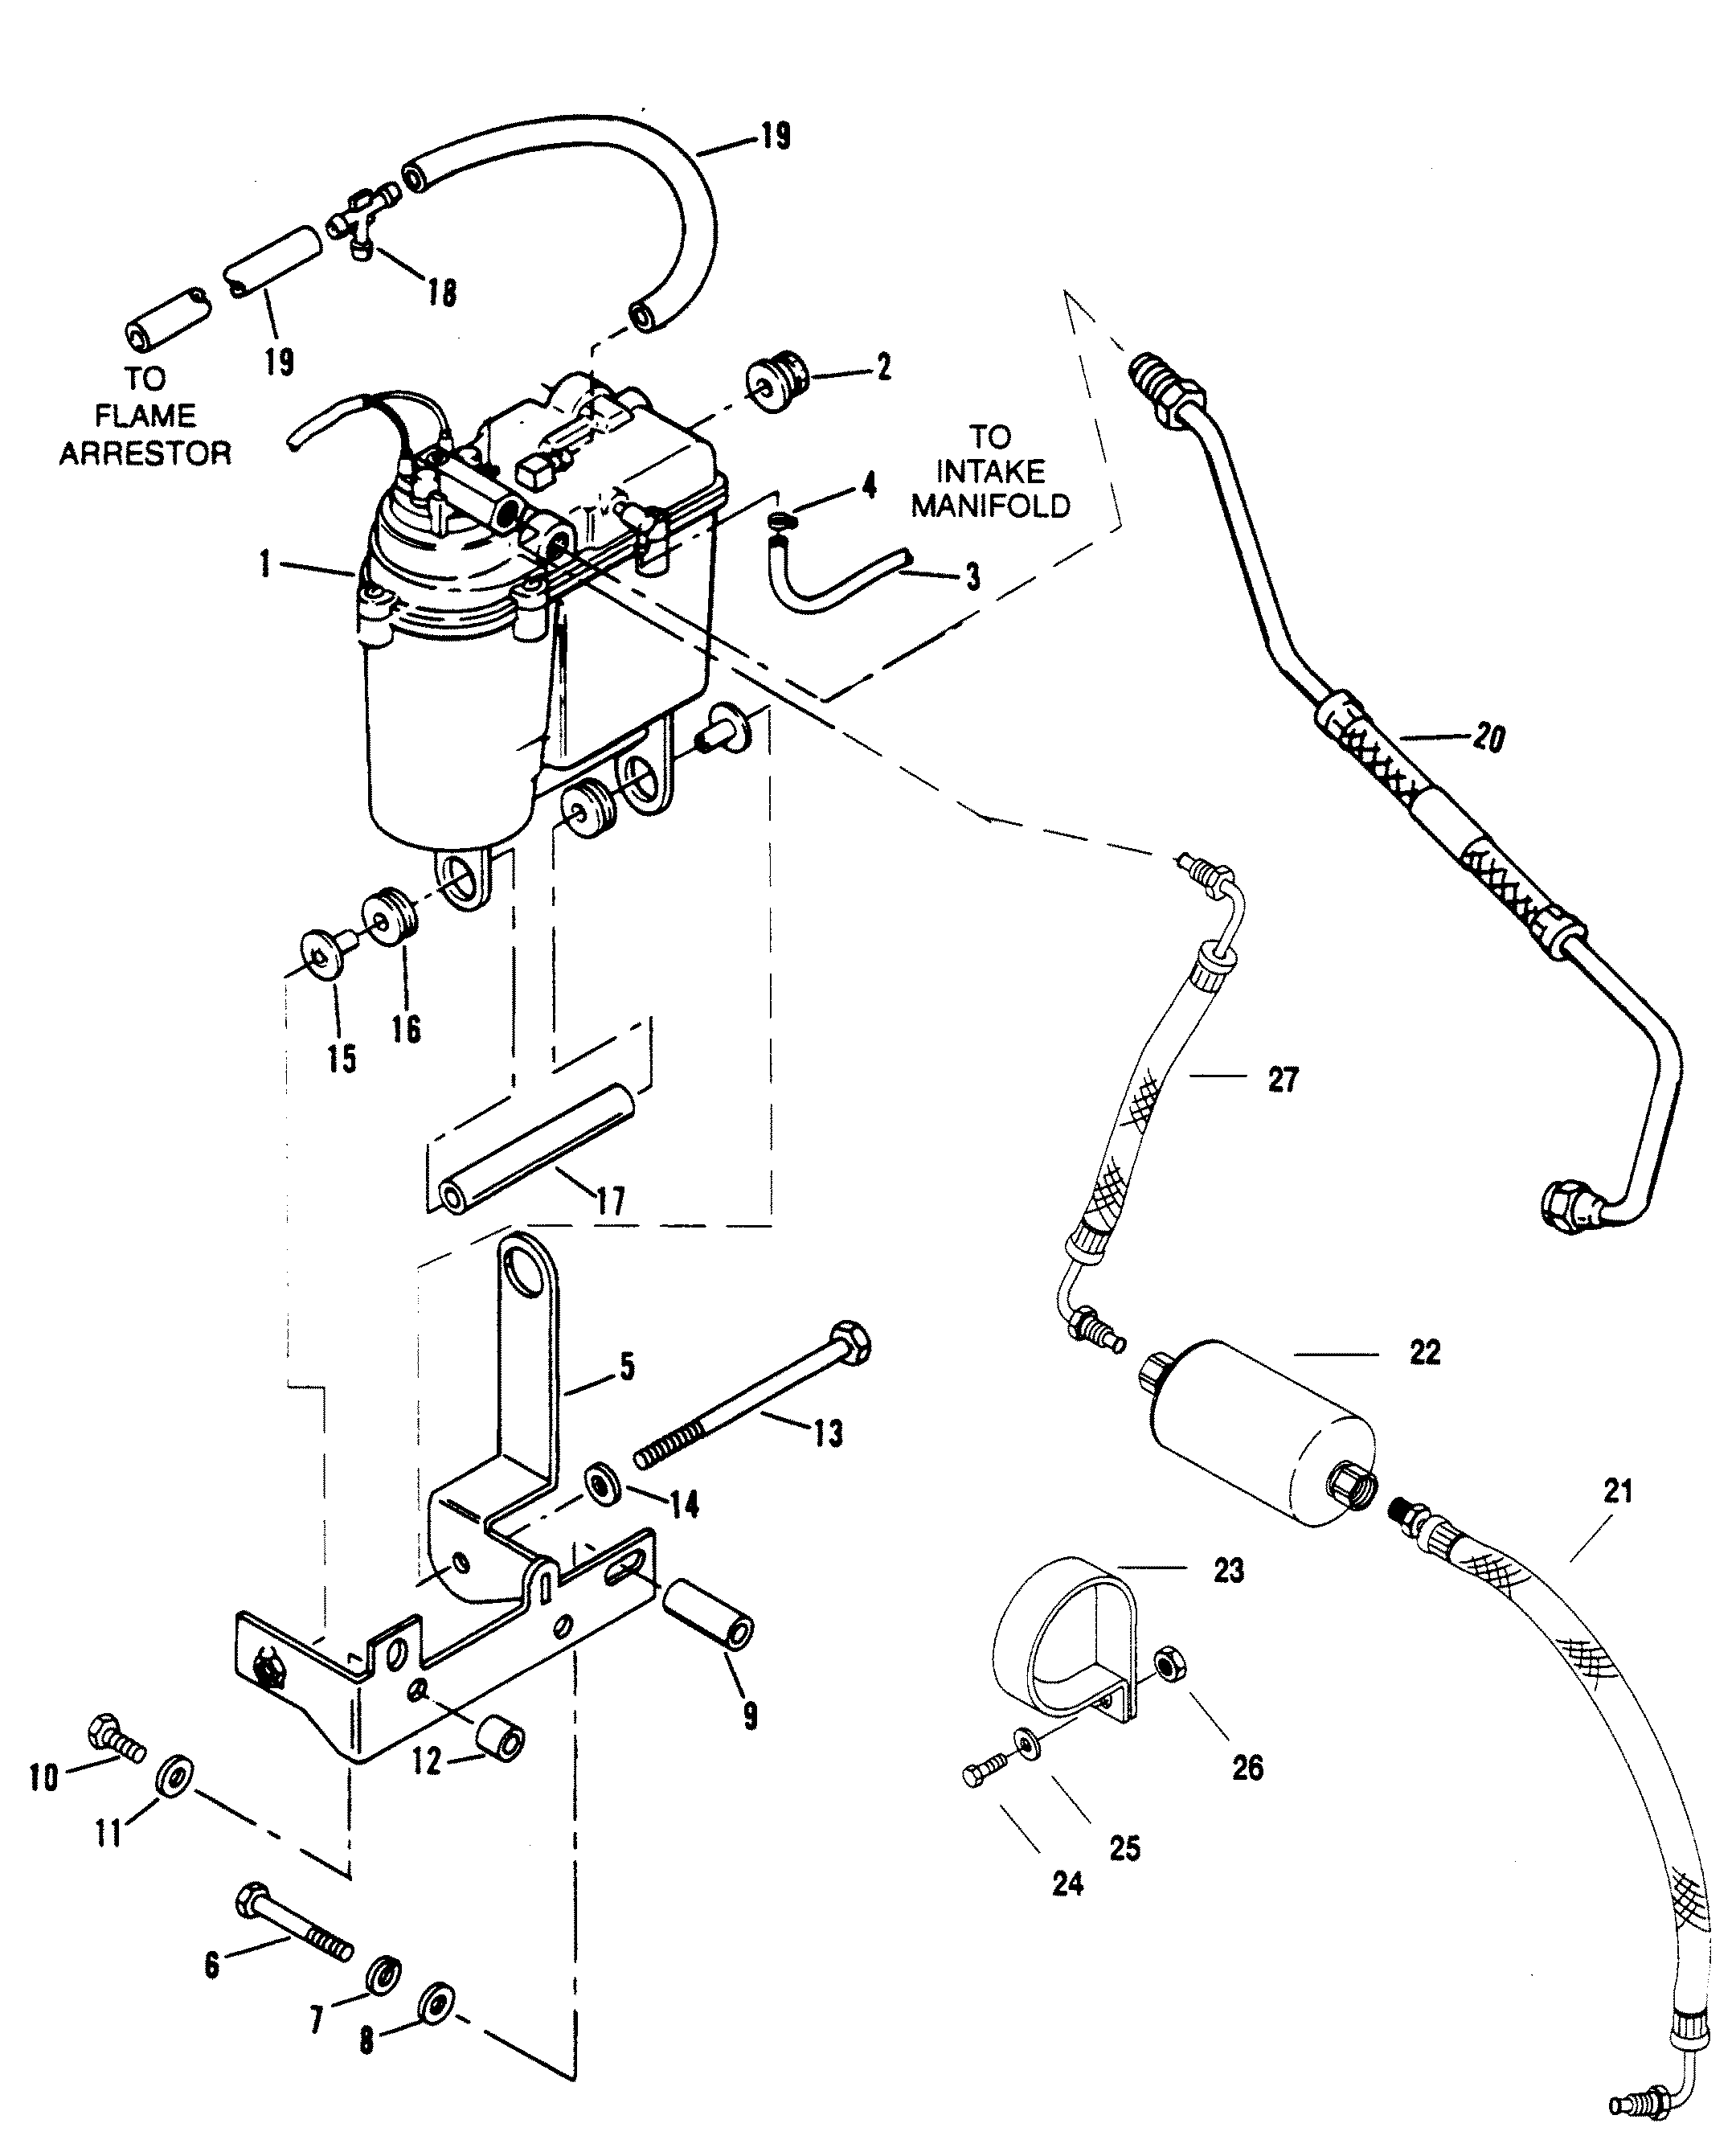 VAPOR SEPARATOR TANK AND FUEL LINES